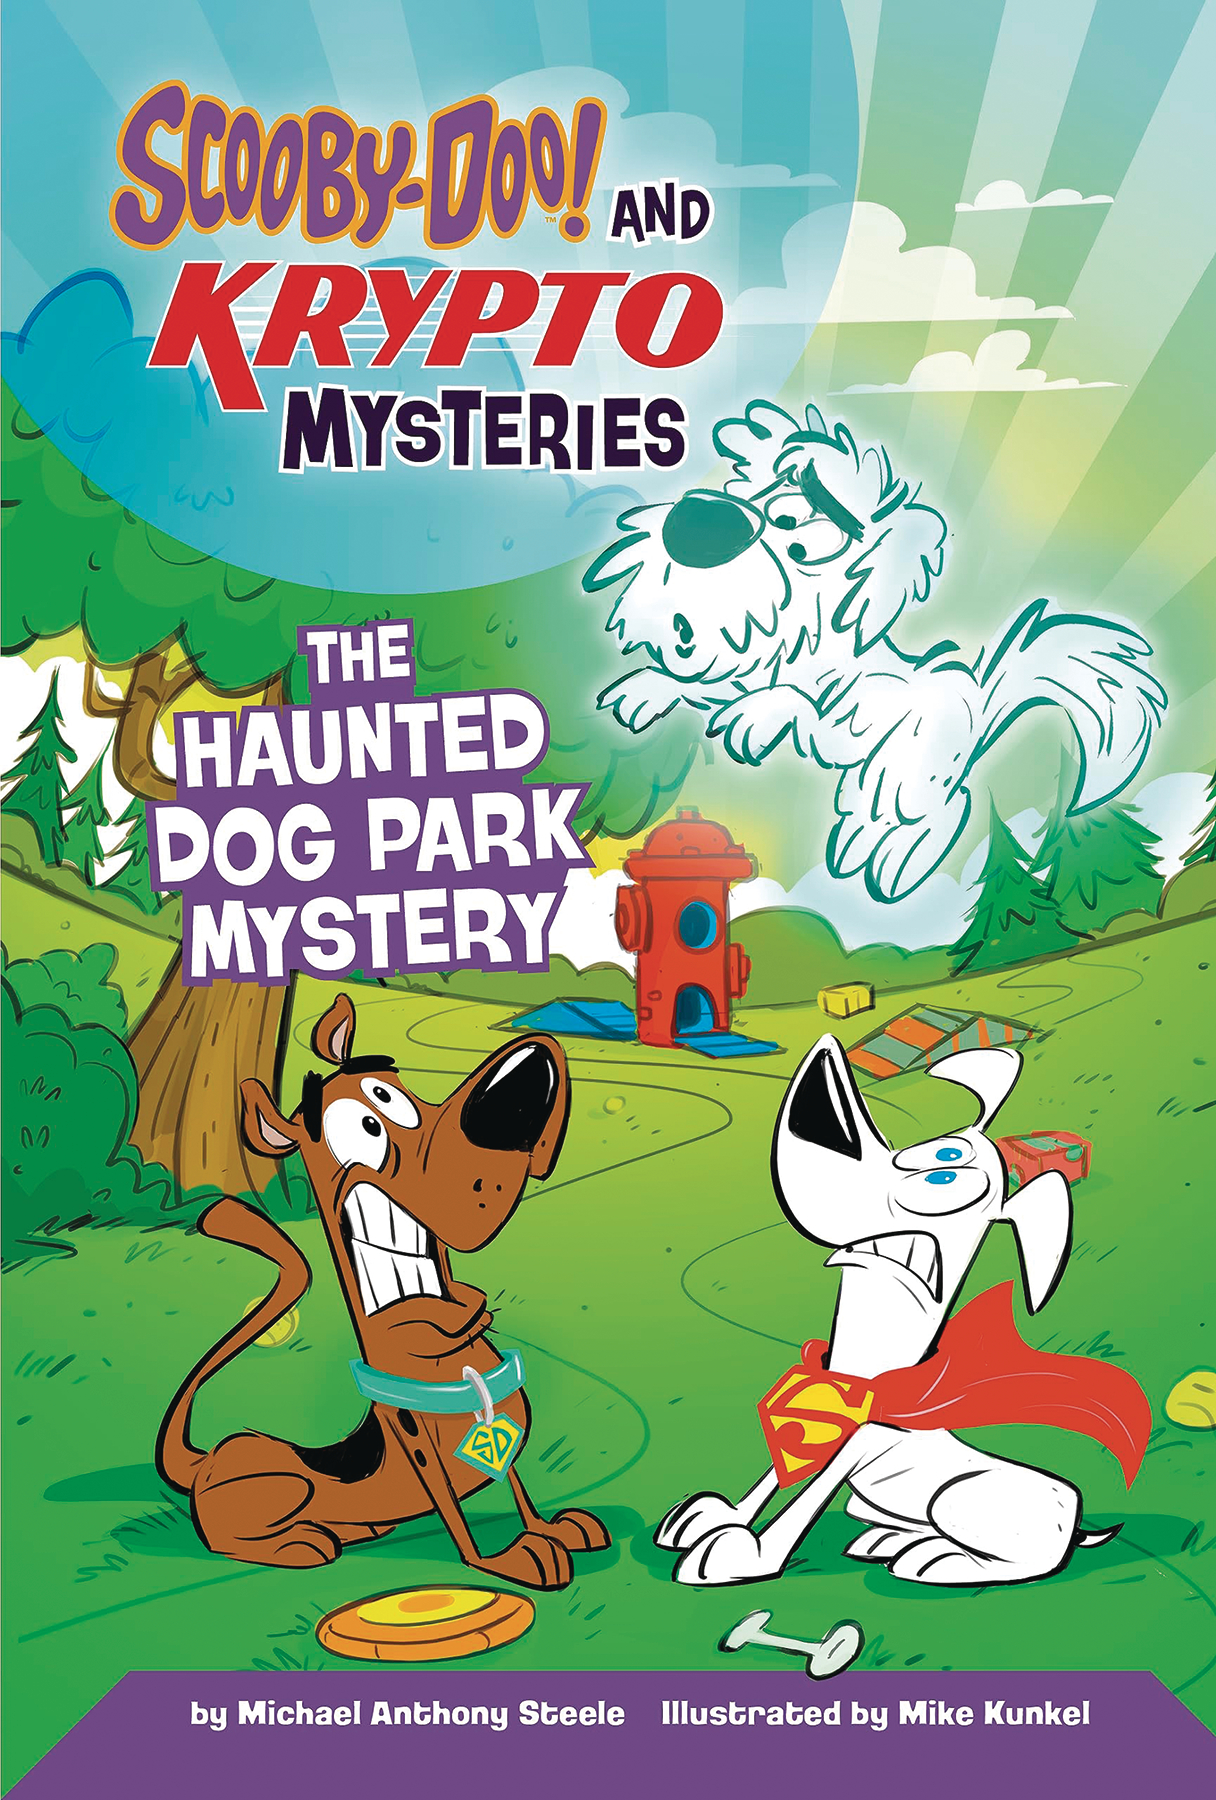 Scooby Doo & Krypto Mysteries Soft Cover #3 Haunted Dog Park Mystery